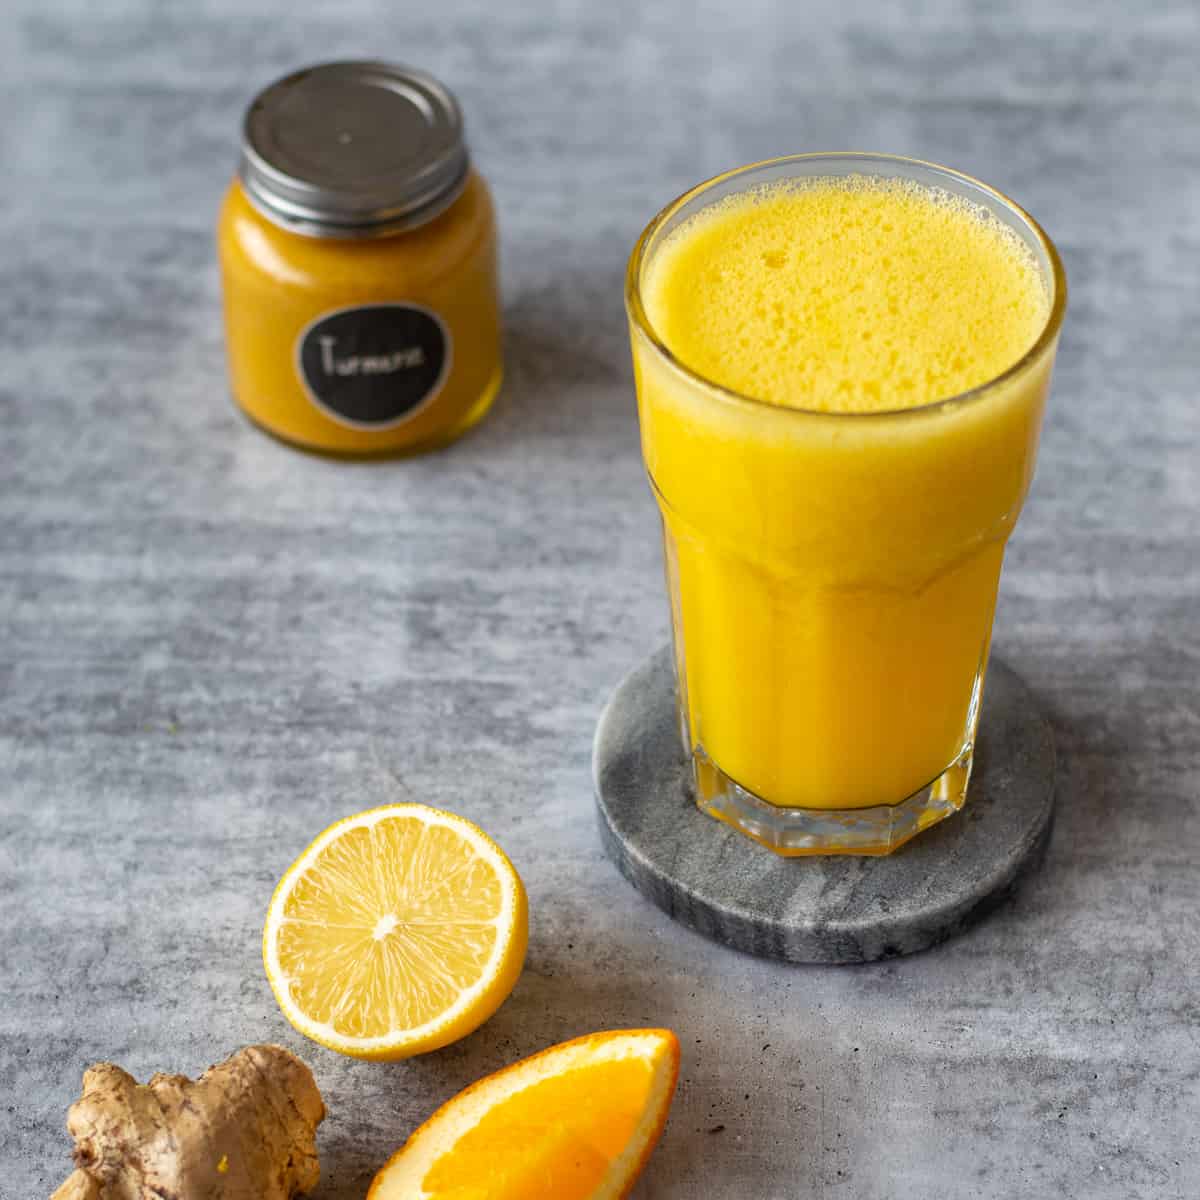 A citrus, ginger and turmeric juice made in the Thermomix.